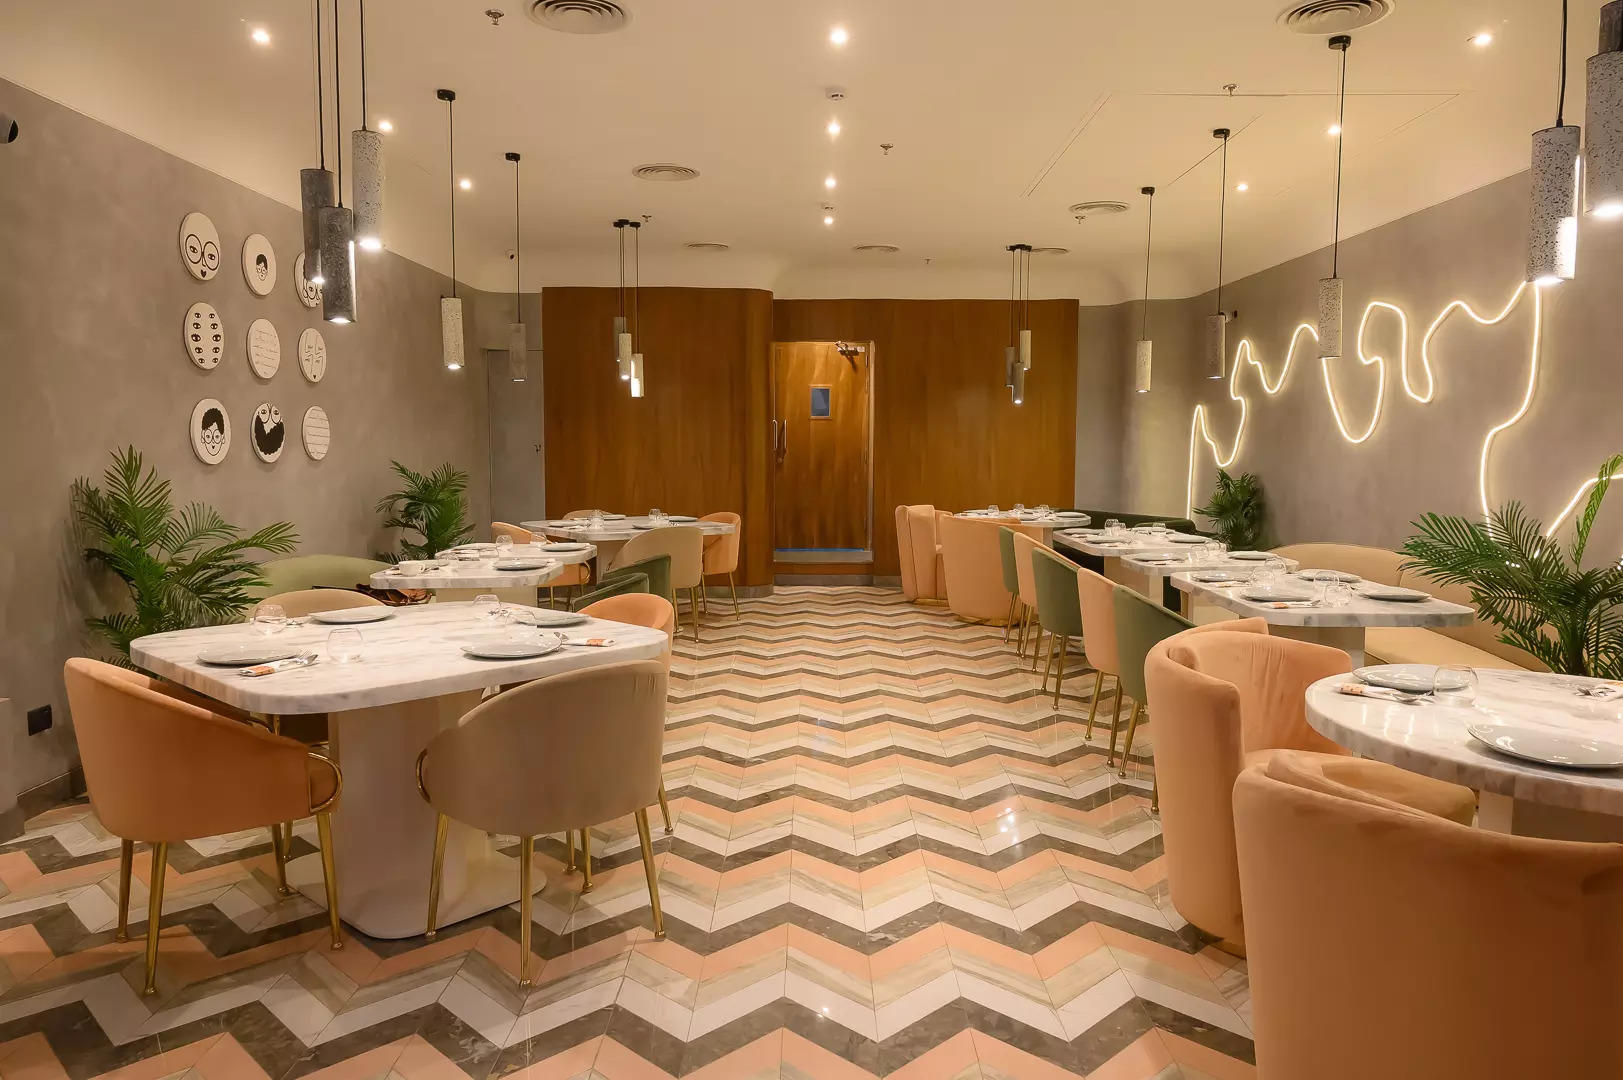 New Delhi gets a modern-day diner - Mary Lou's, Hospitality News ...